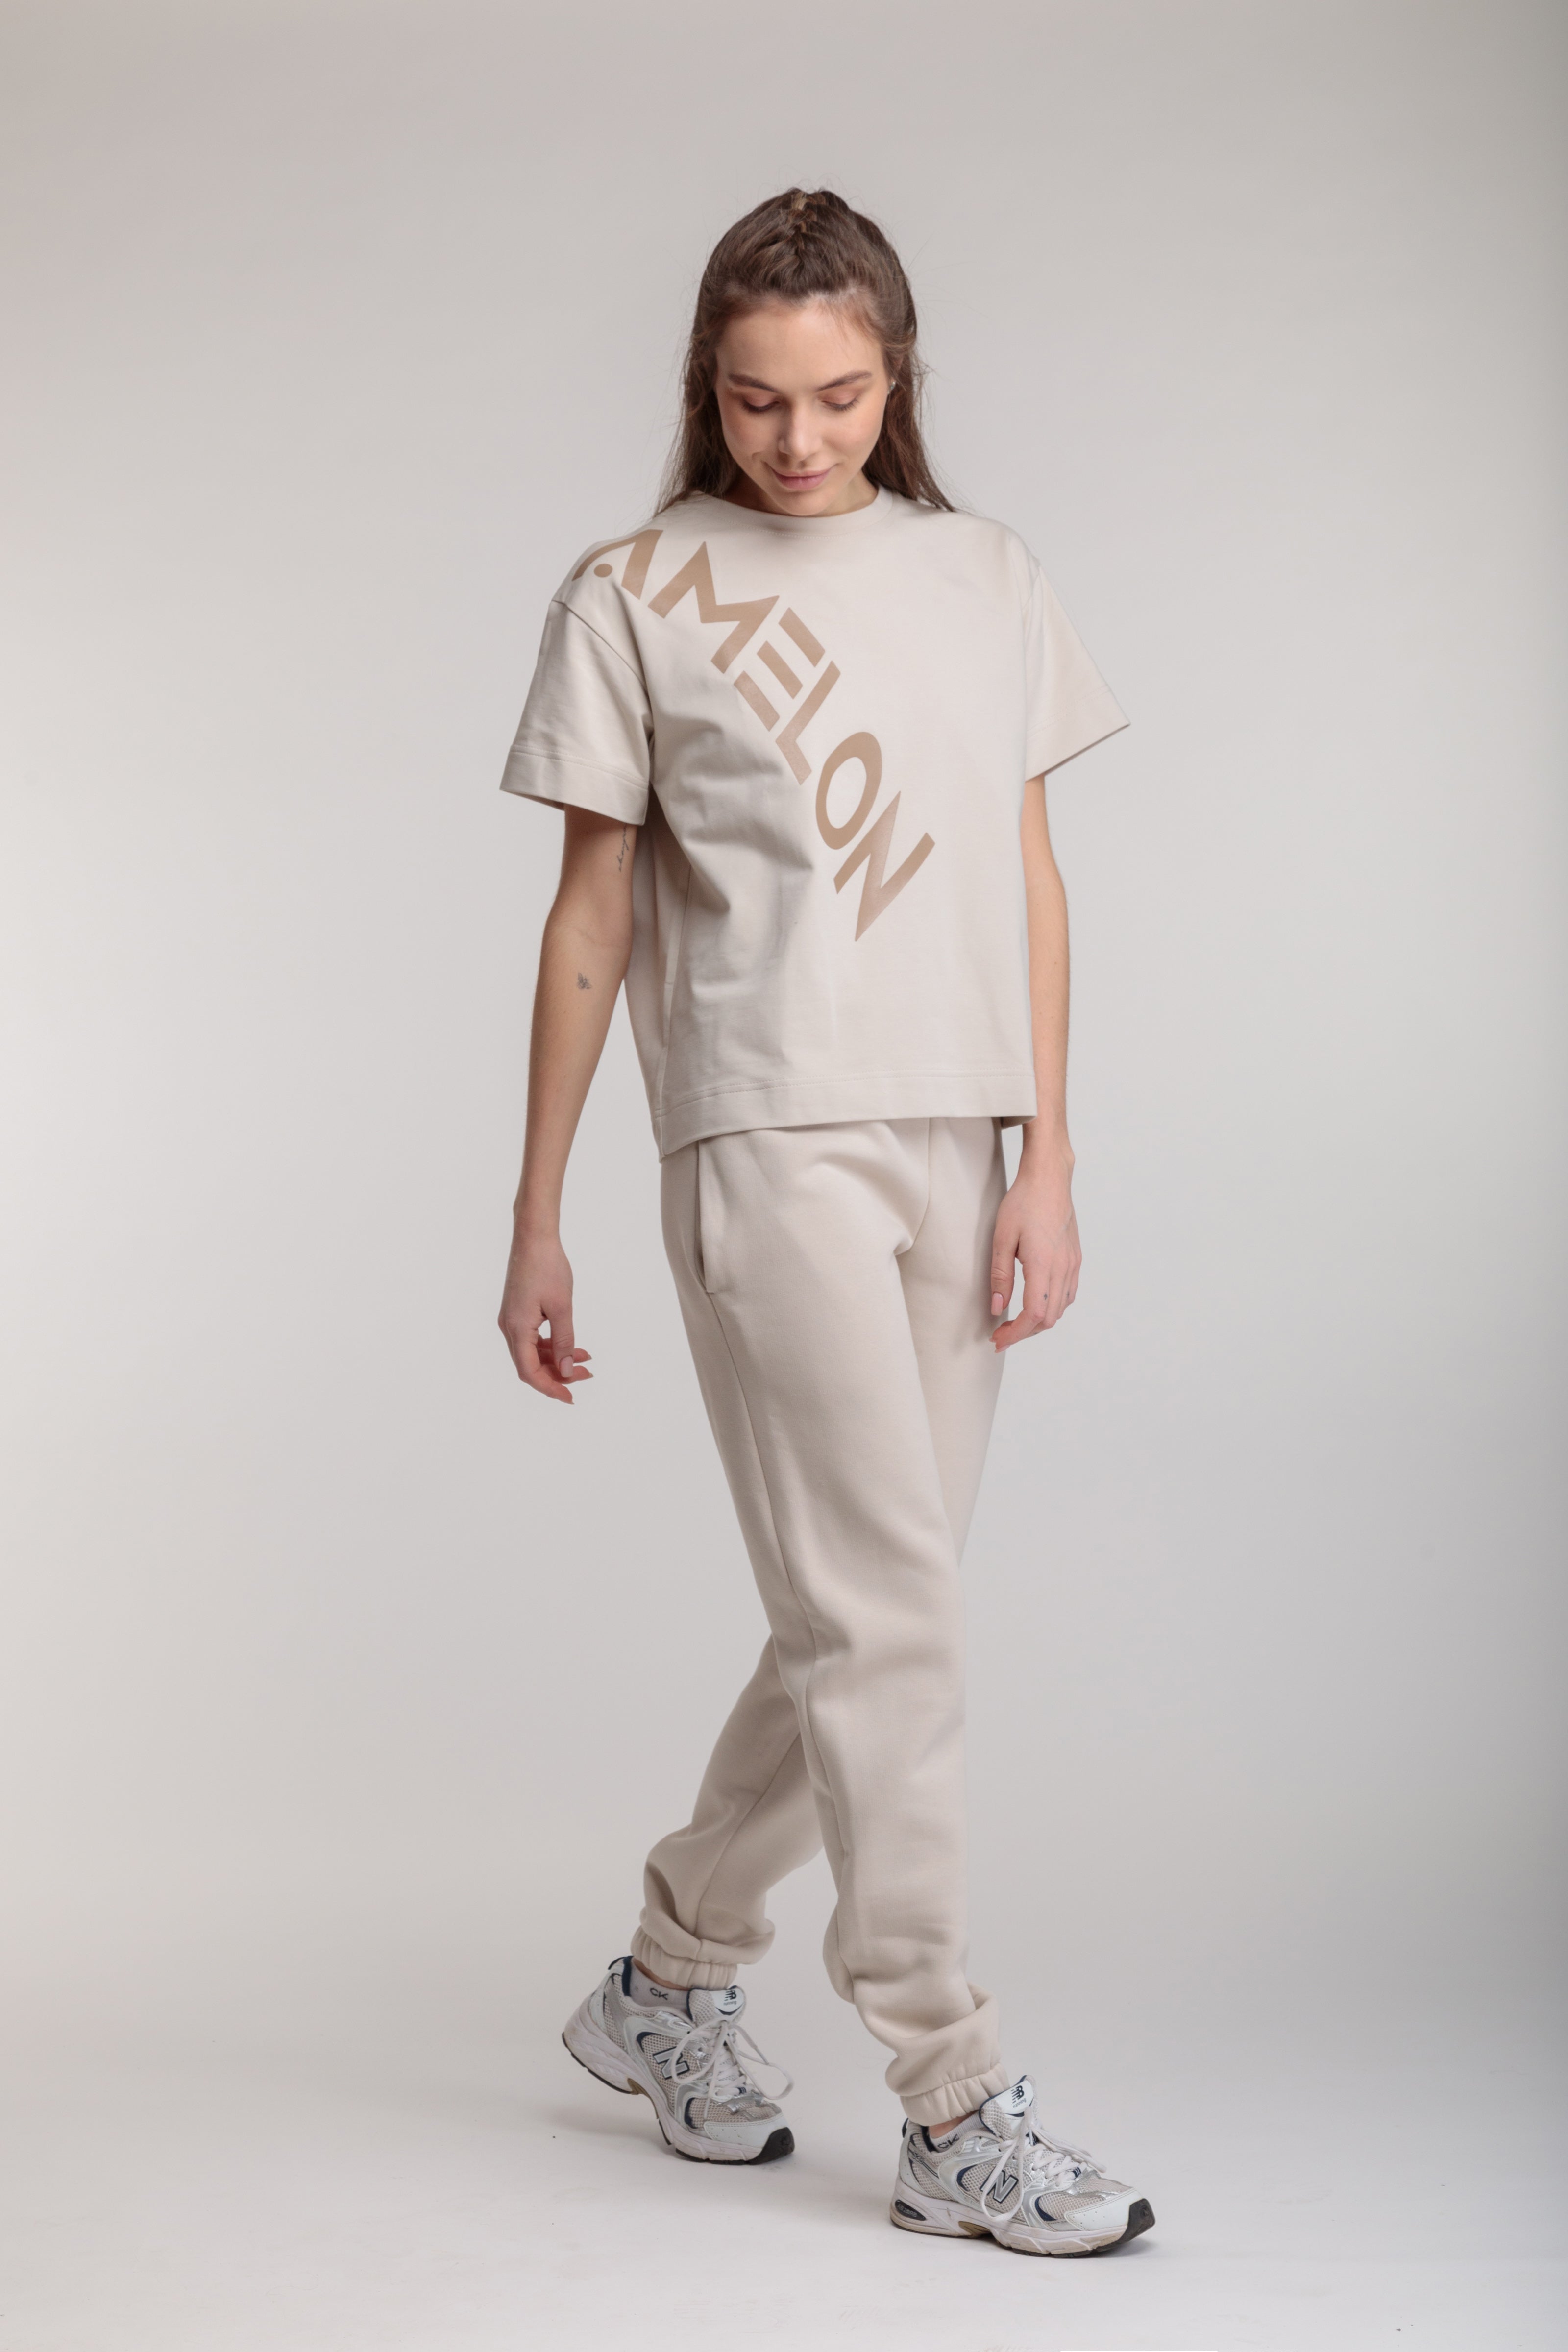 Women's jogger pants in milky color